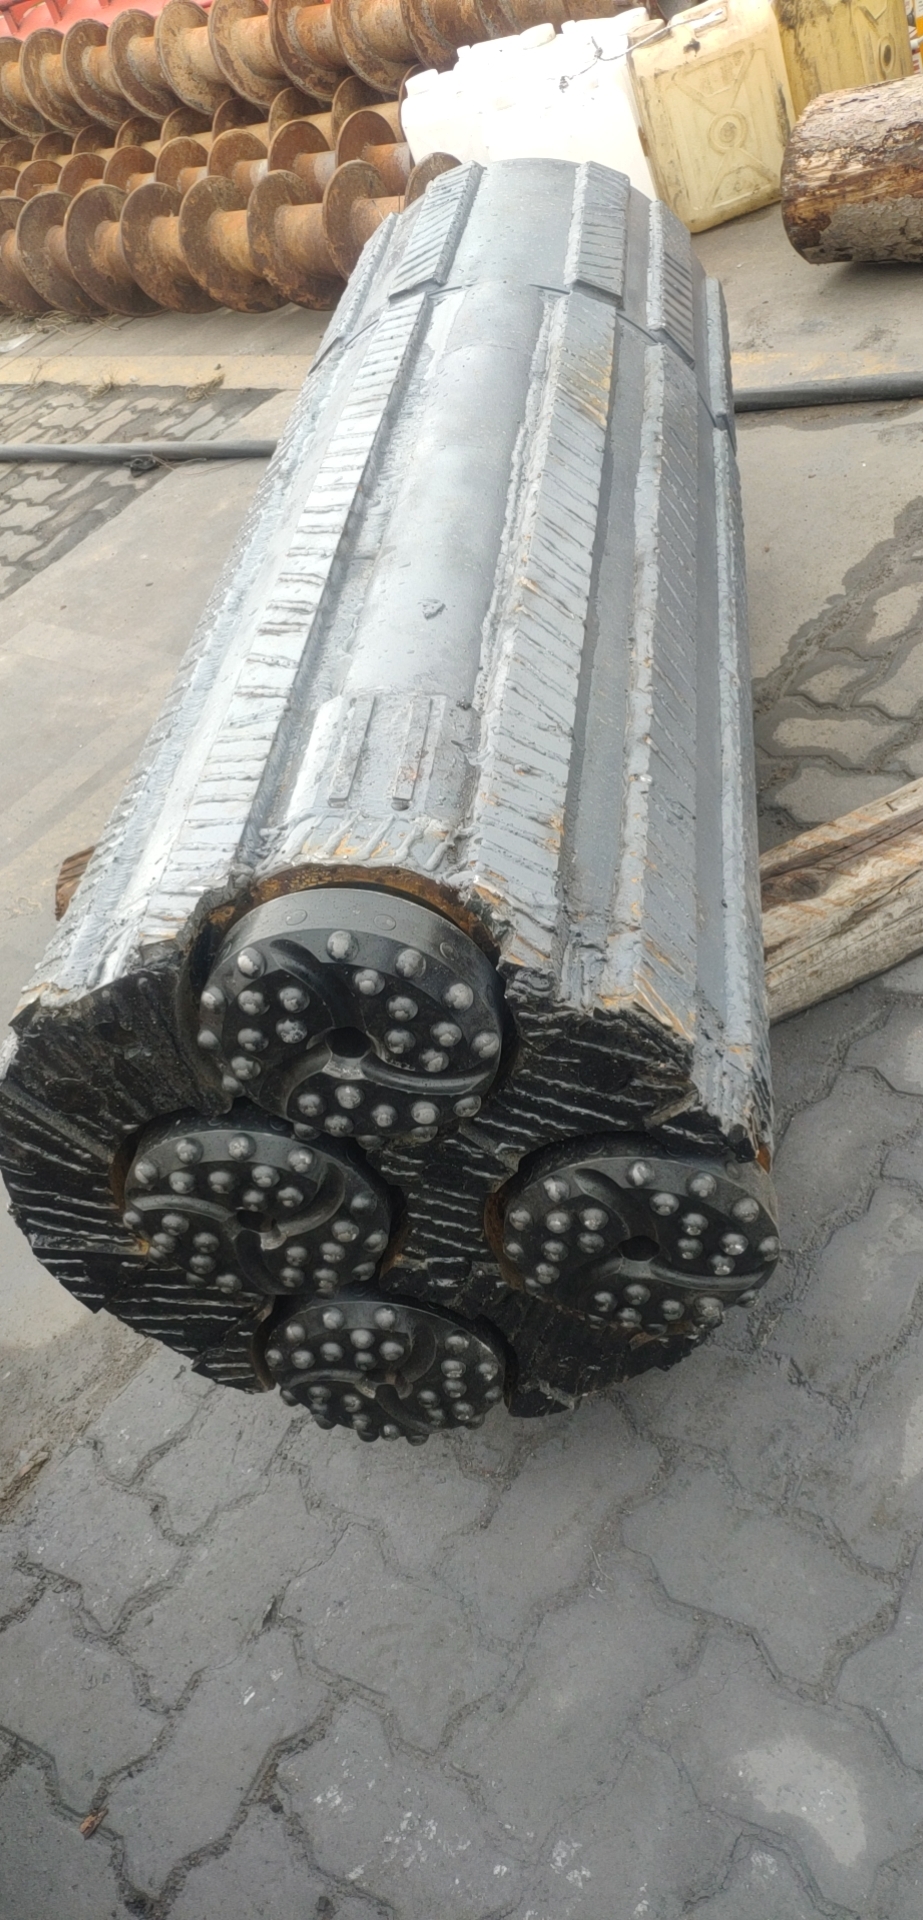 THE COMBINED DTH HAMMER WAS APPLIED TO THE CONSTRUCTION OFSHANDONG QINGDAO METRO 